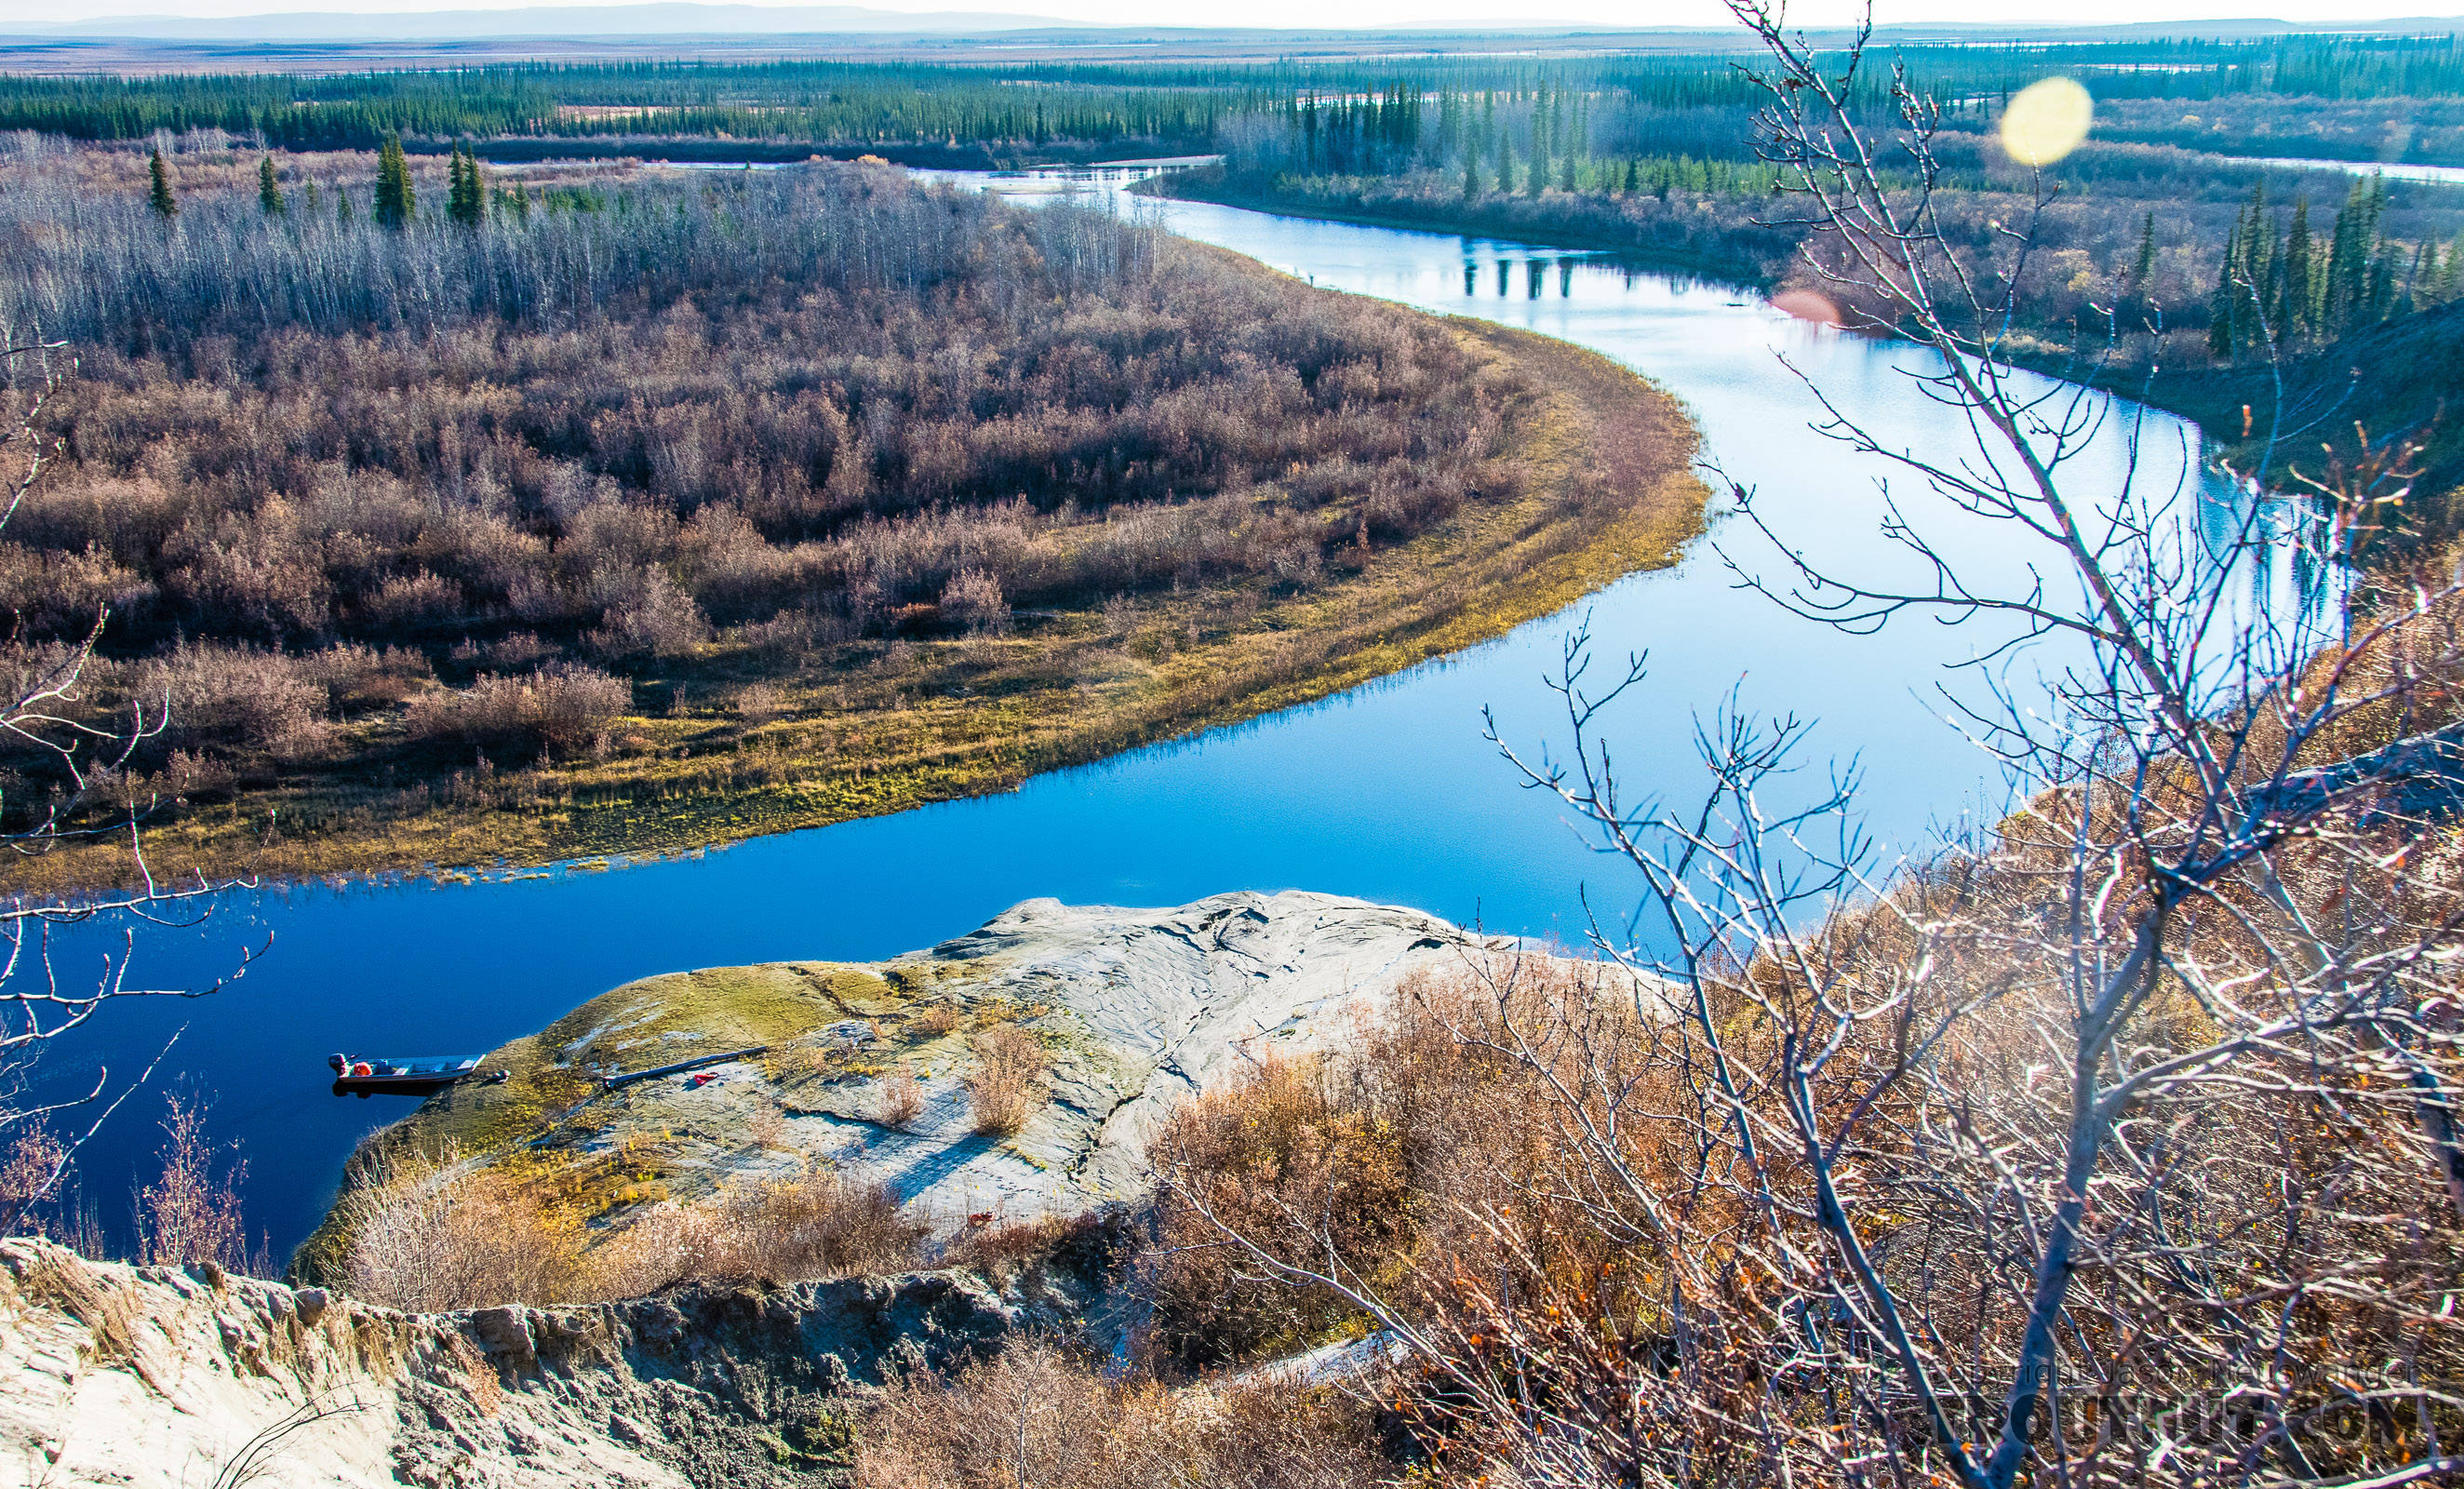 Looking down at the new permafrost slump From the Selawik River in Alaska.